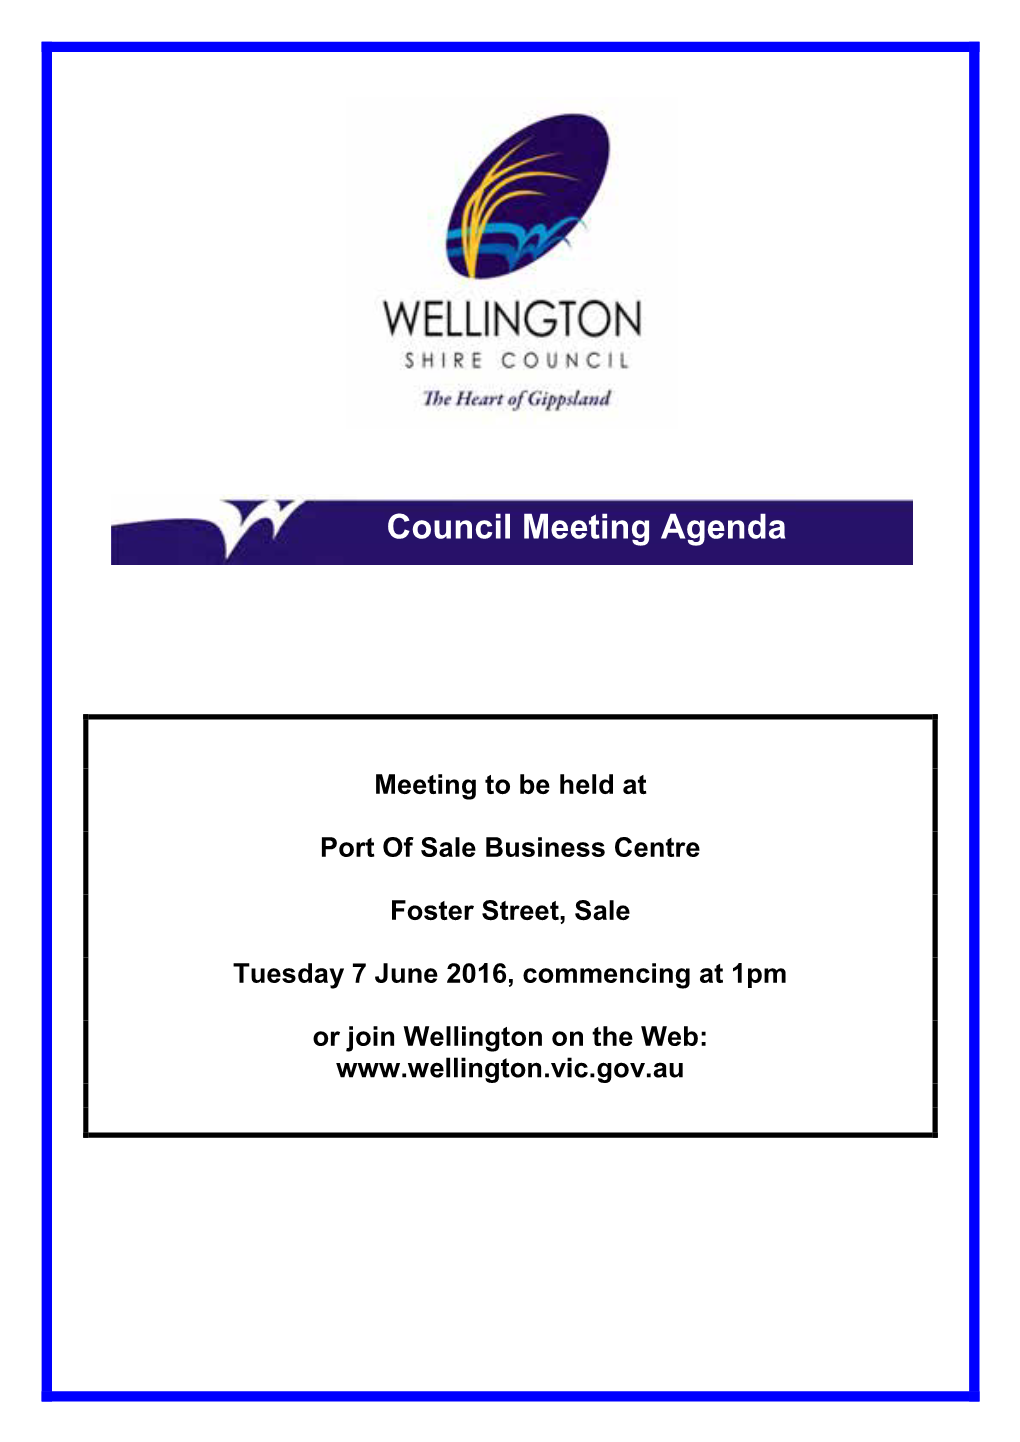 Council Meeting Information